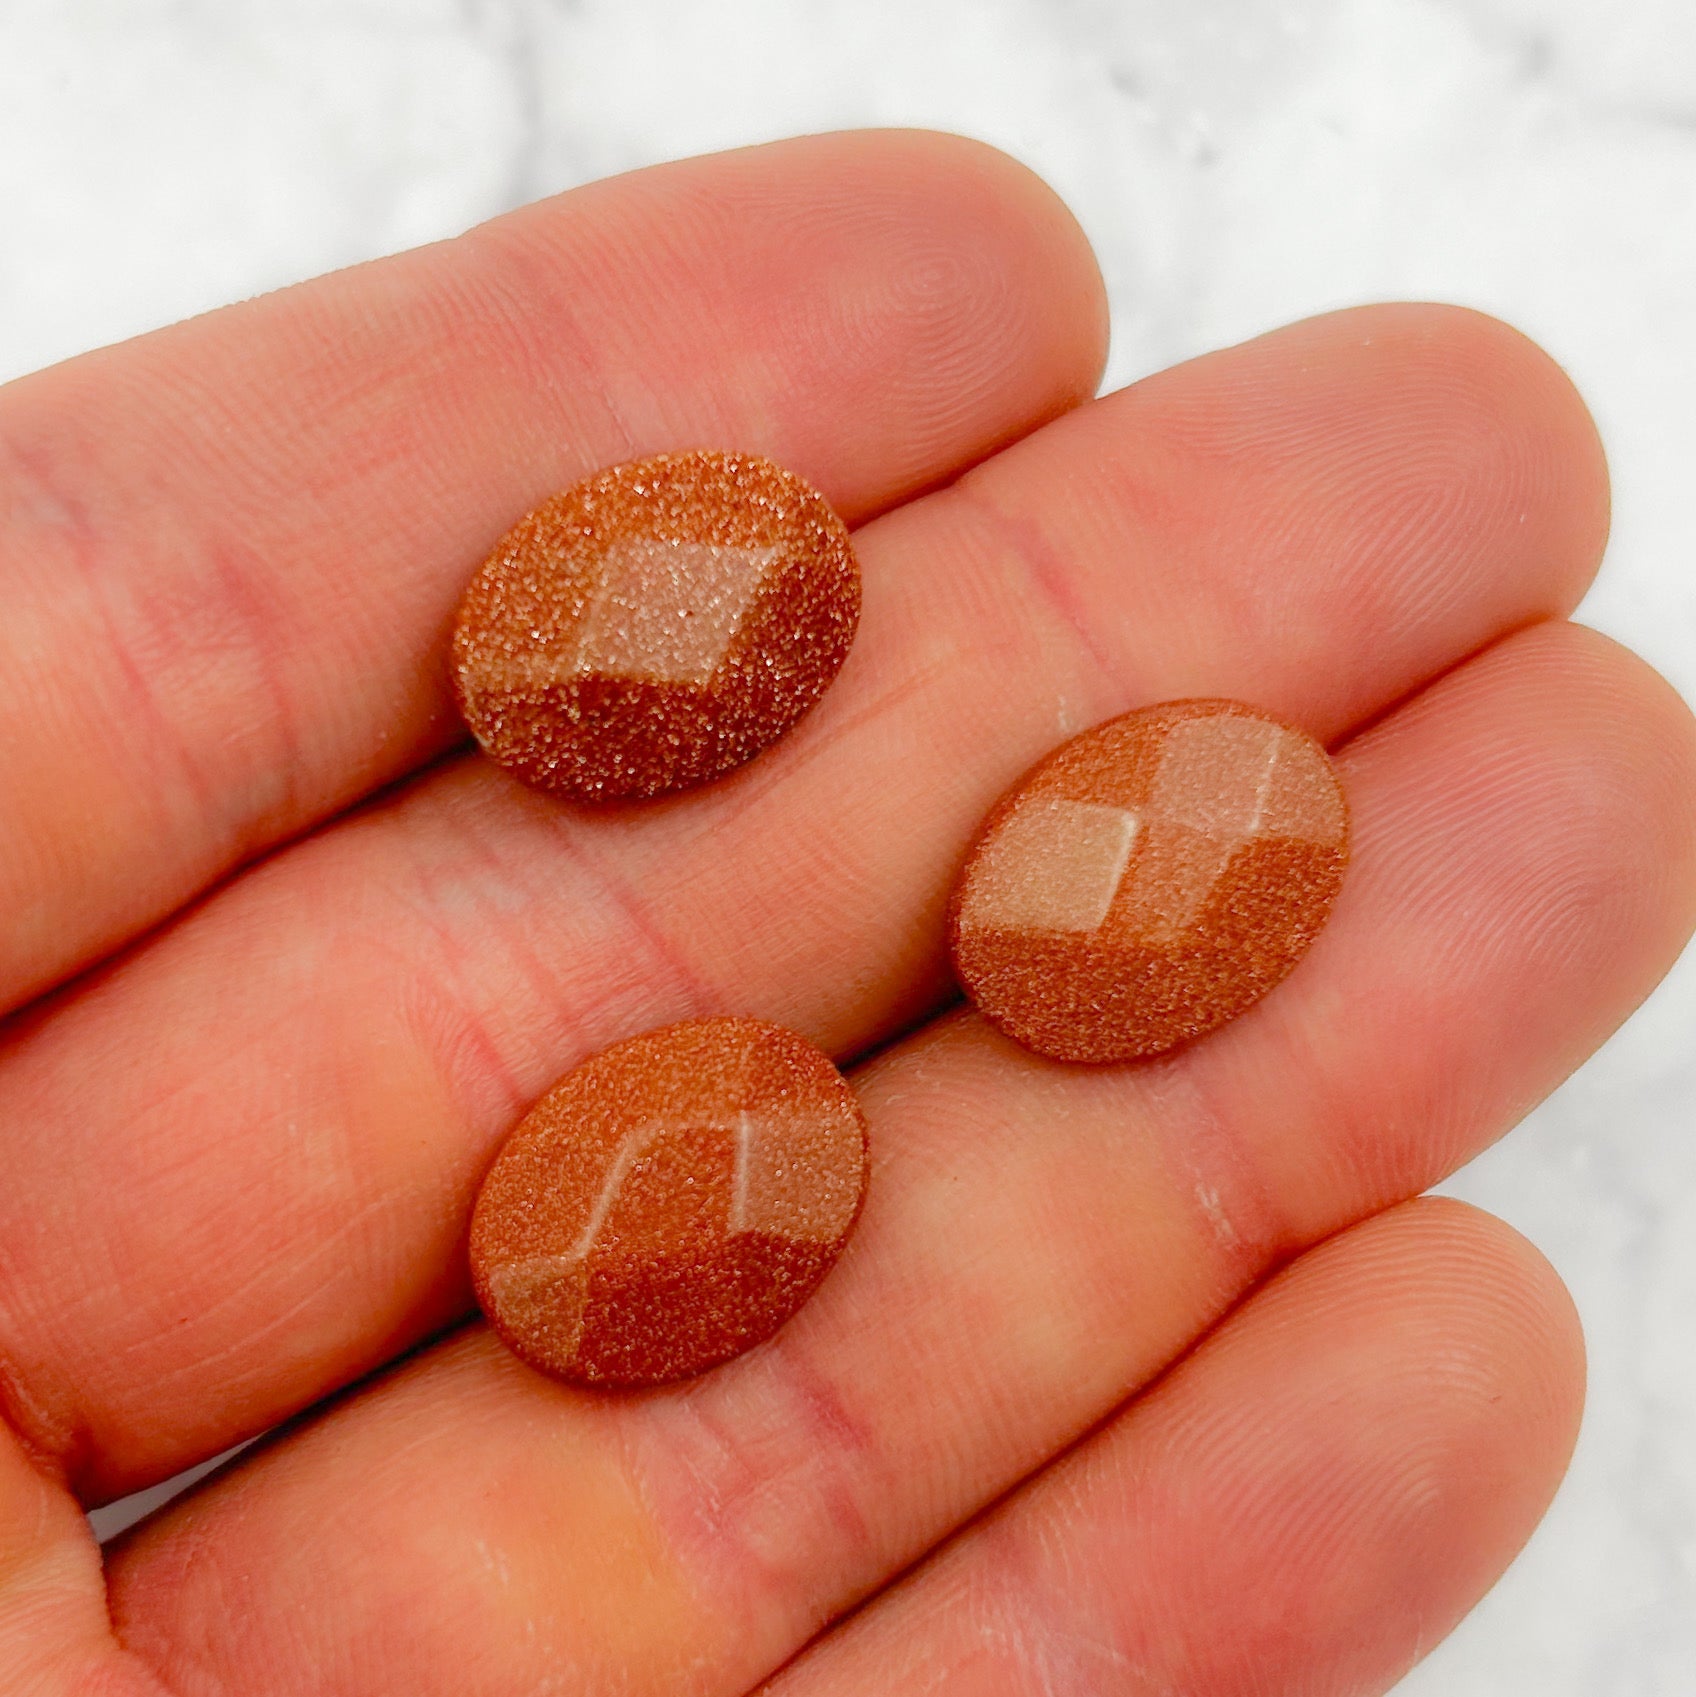 17mm x 13mm Copper Goldstone Faceted Oval Focal Bead Pack (3 Beads)